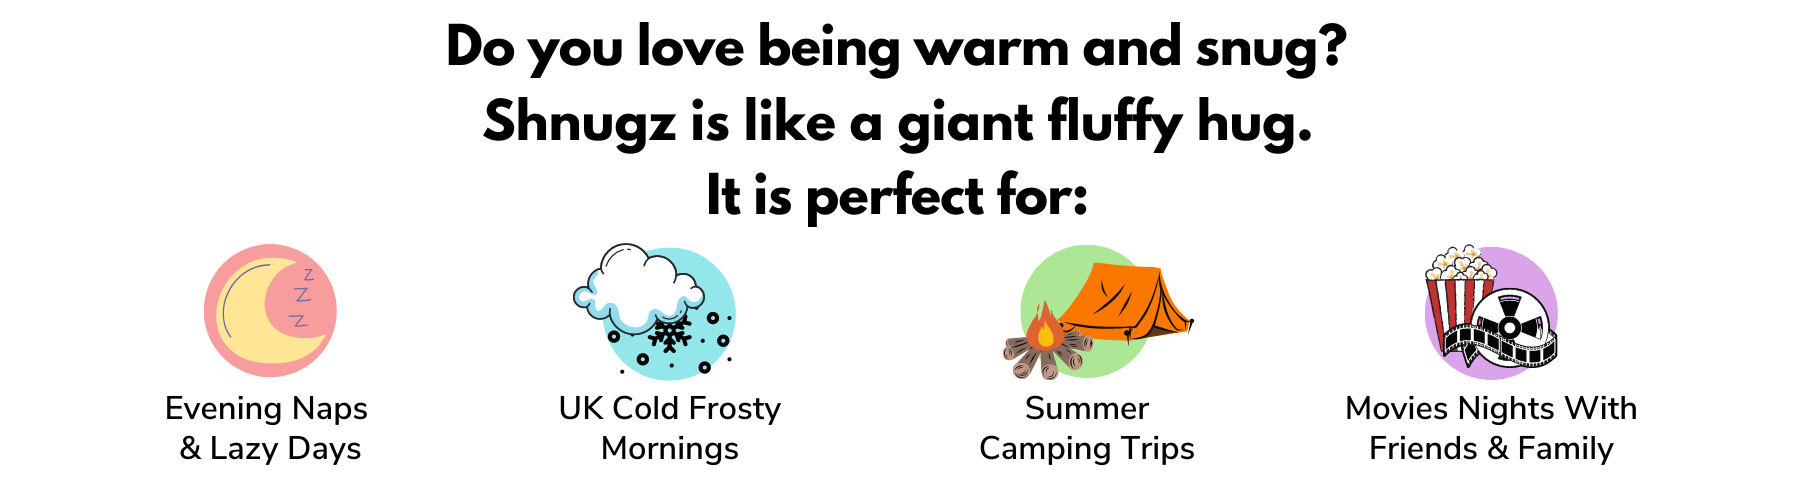 Do you love being warm and snug? Shnugz is like a giant hug. It's perfect for: evening naps or azy days, Frosty cold UK mornings, Summer camping trips, Watching movies with friend's